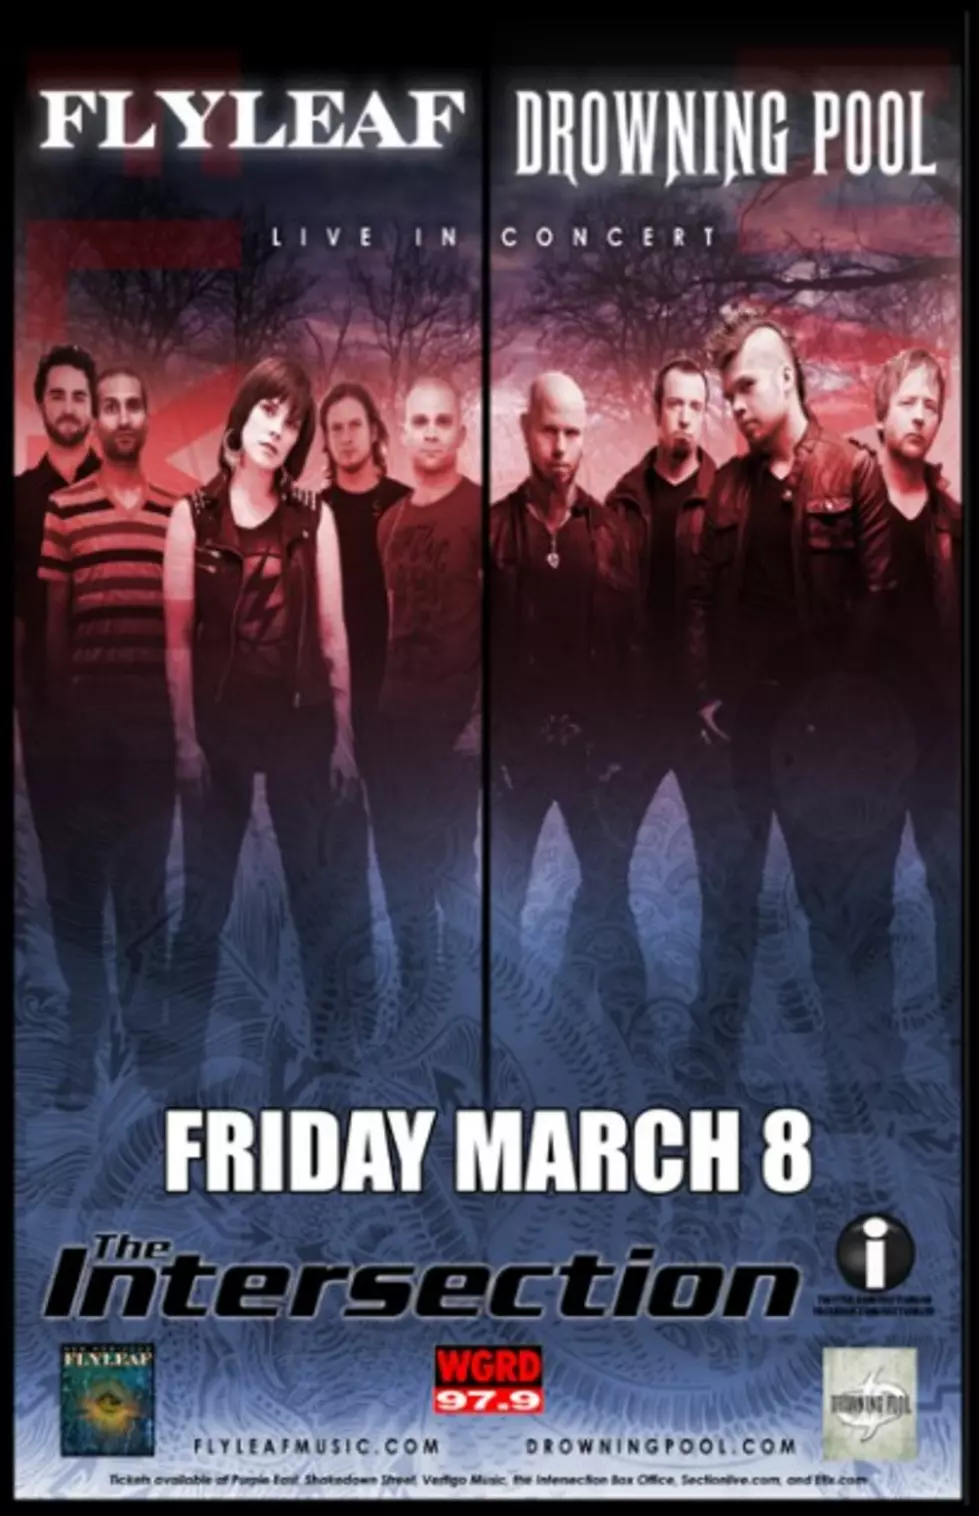 GRD Presents Flyleaf and Drowning Pool at The Intersection